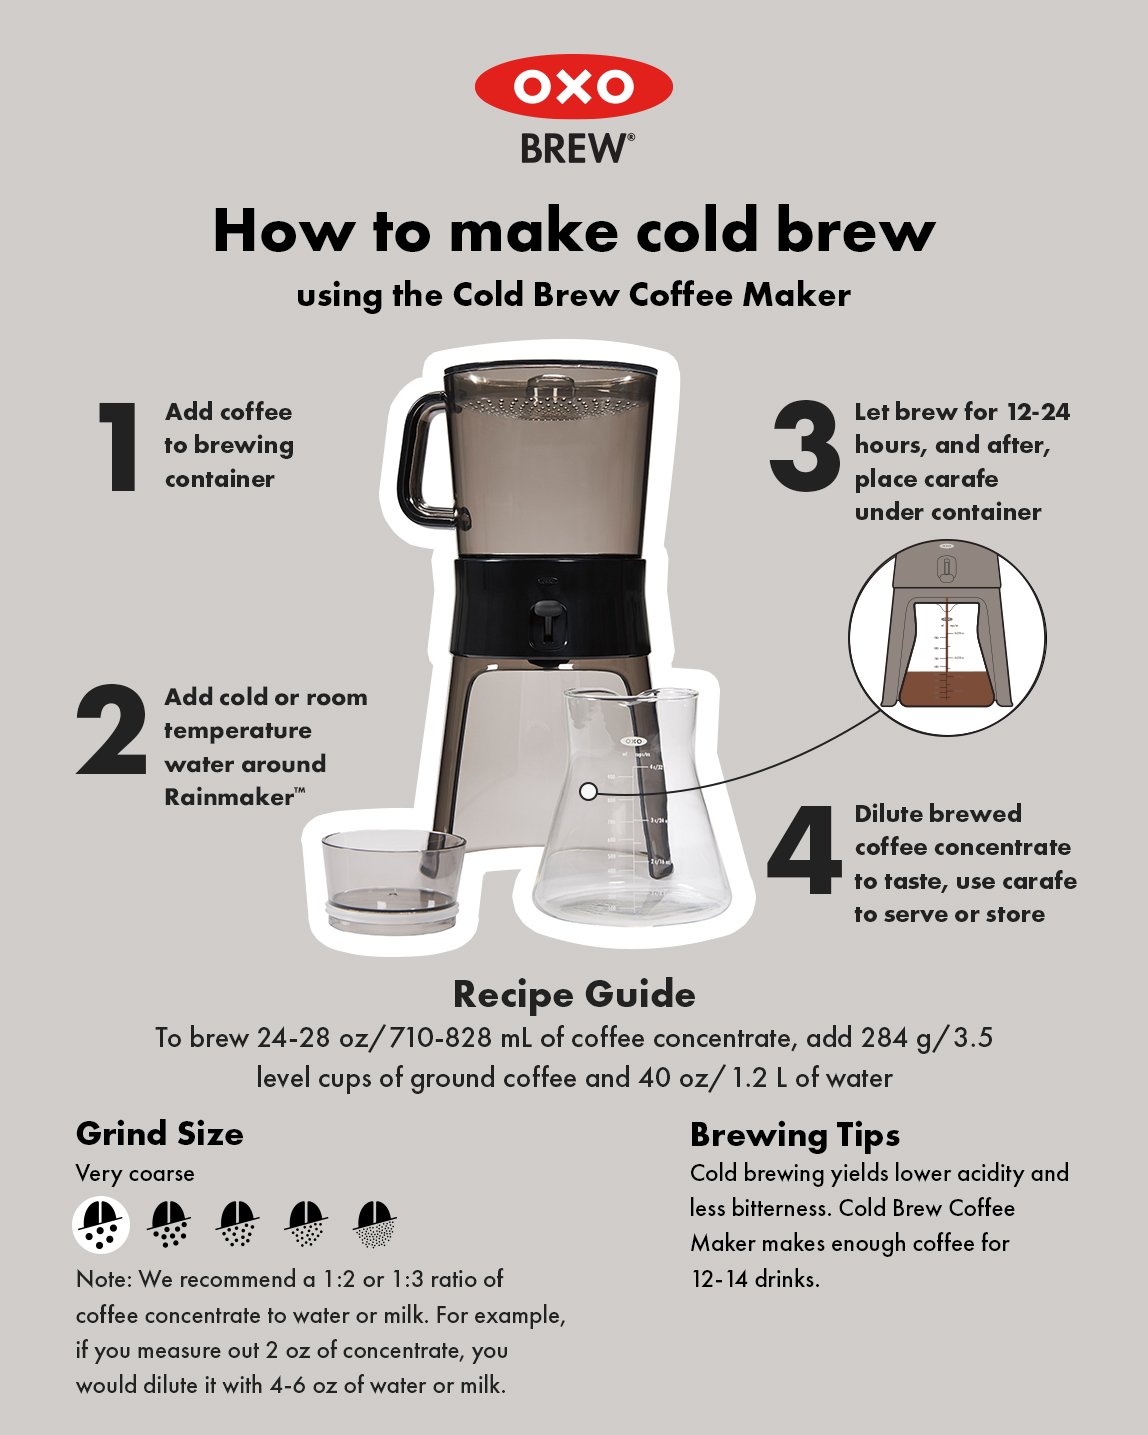 How to Use the OXO Cold Brew Coffee Maker